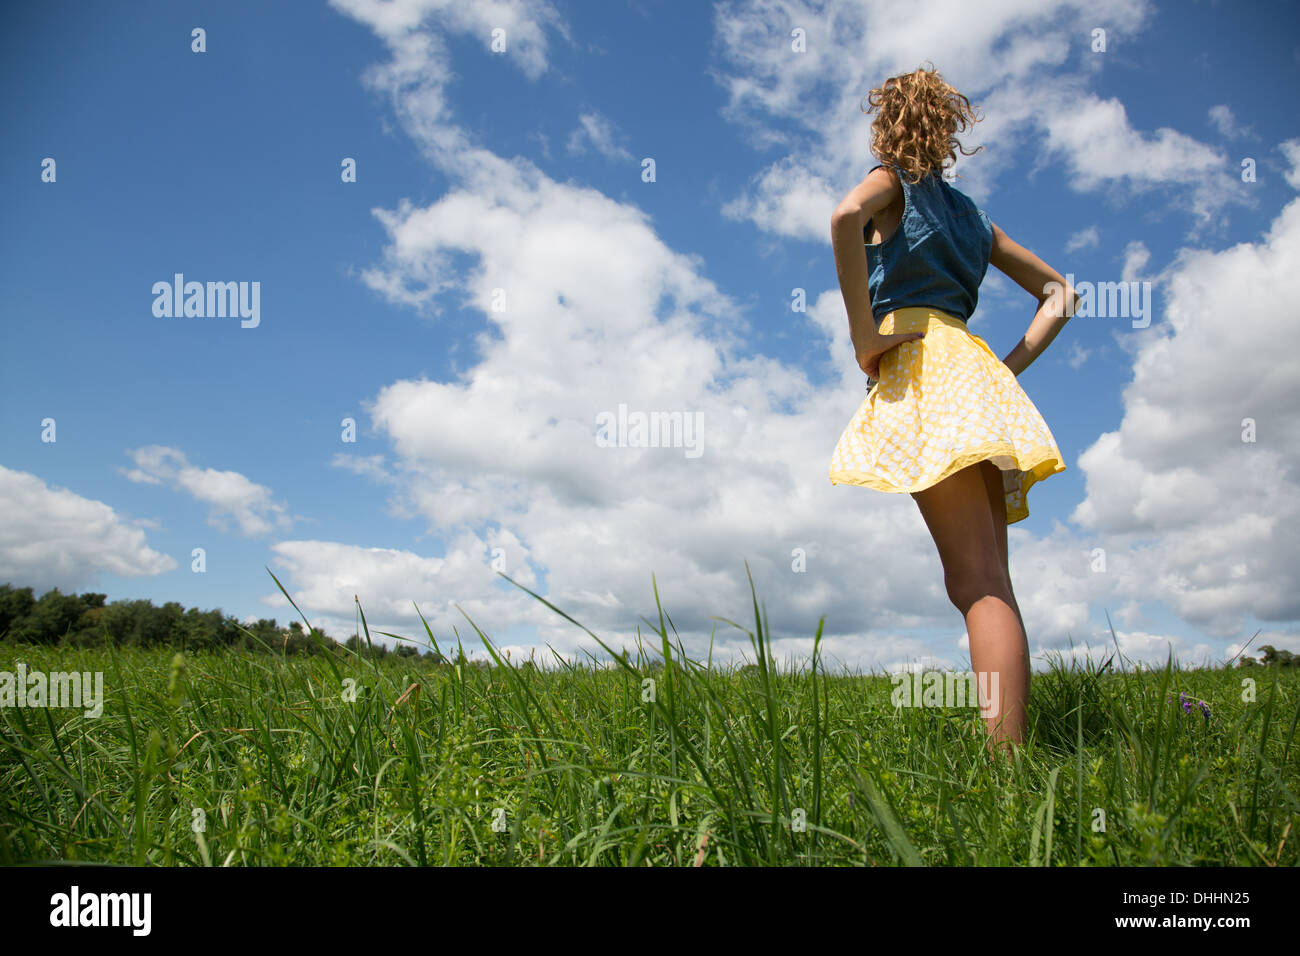 Teenage girl standing with hands on hips in field Stock Photo